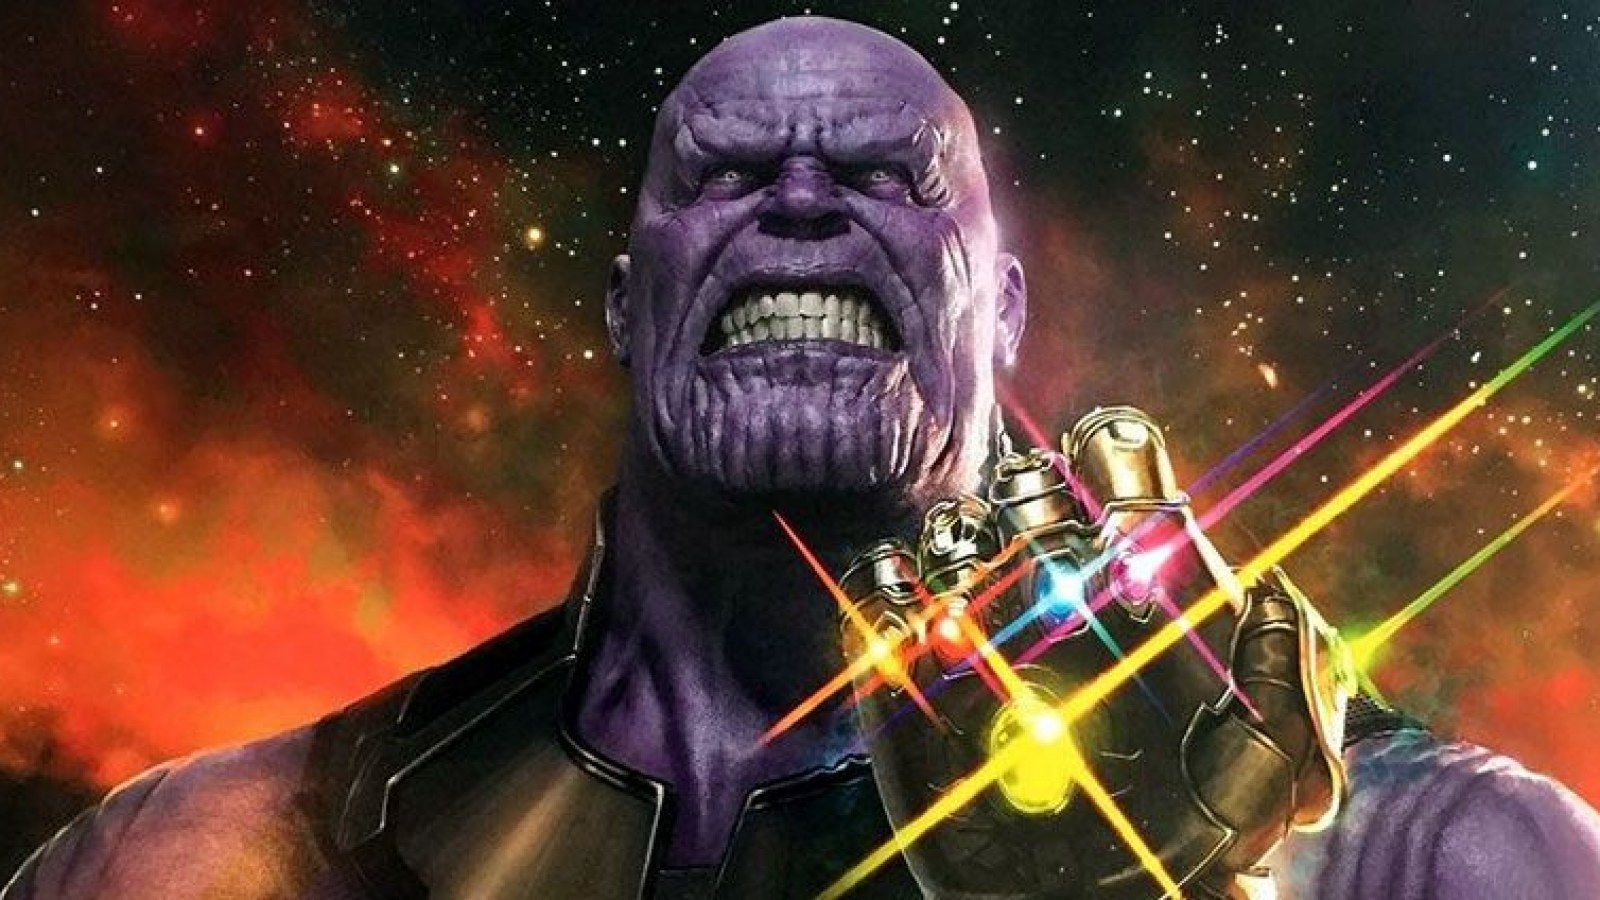 Avengers 4 Theories: What is the Seventh Infinity Stone? The Ego Gem Could Play a Huge Role in the Next Avenger's Movie